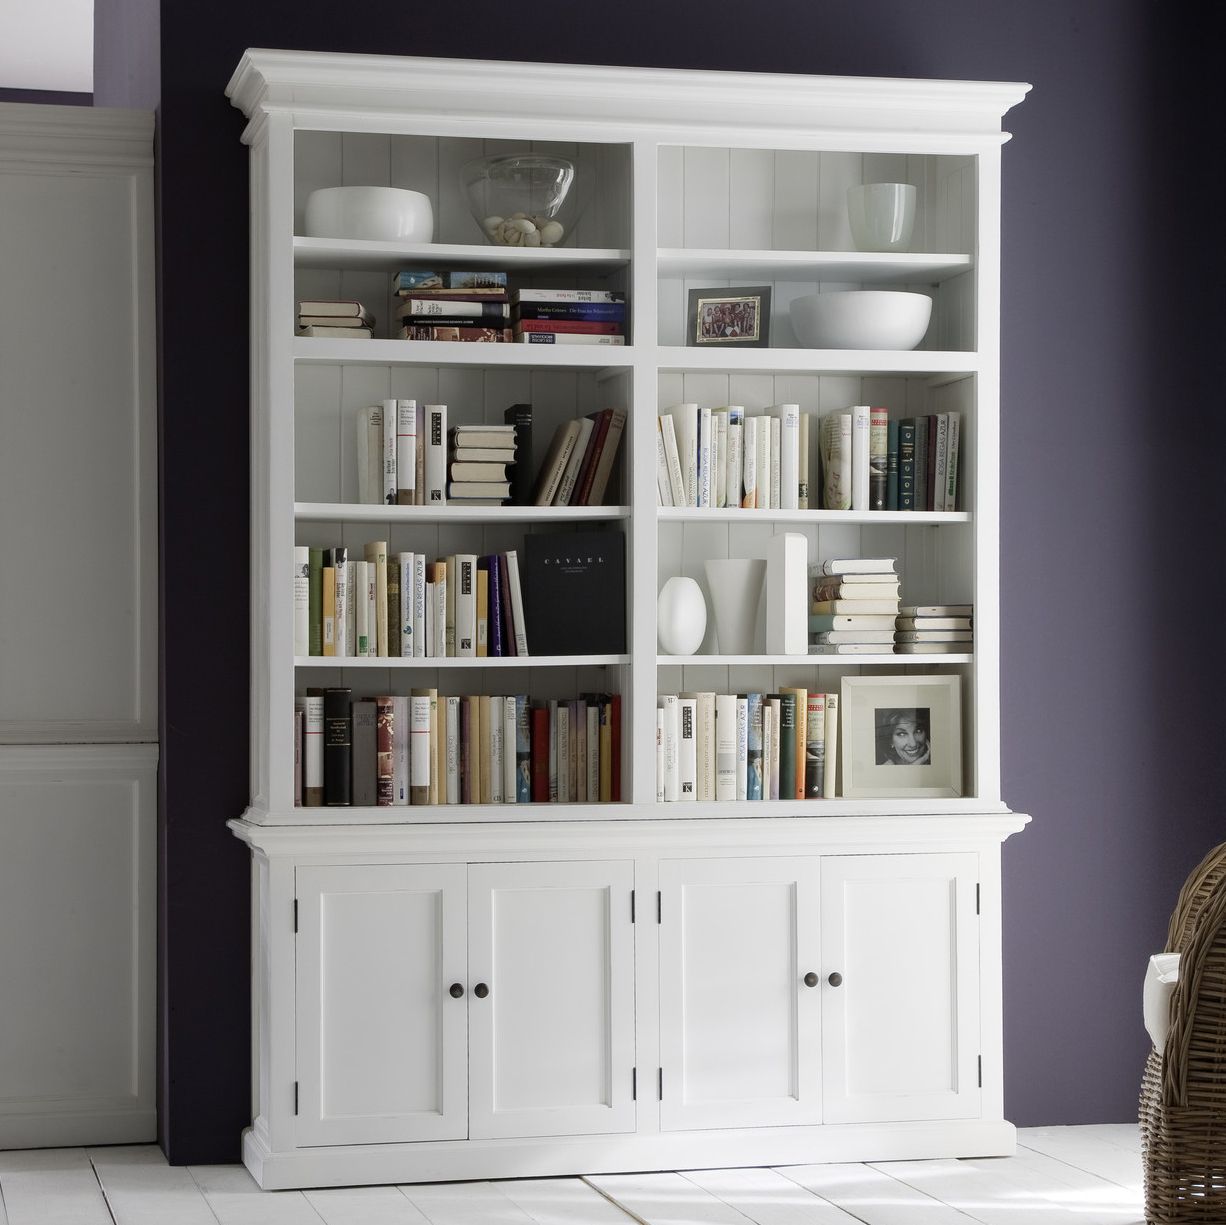 Halifax Hutch Bookcase | Temple & Webster Throughout Two Door Hutch Bookcases (View 14 of 15)